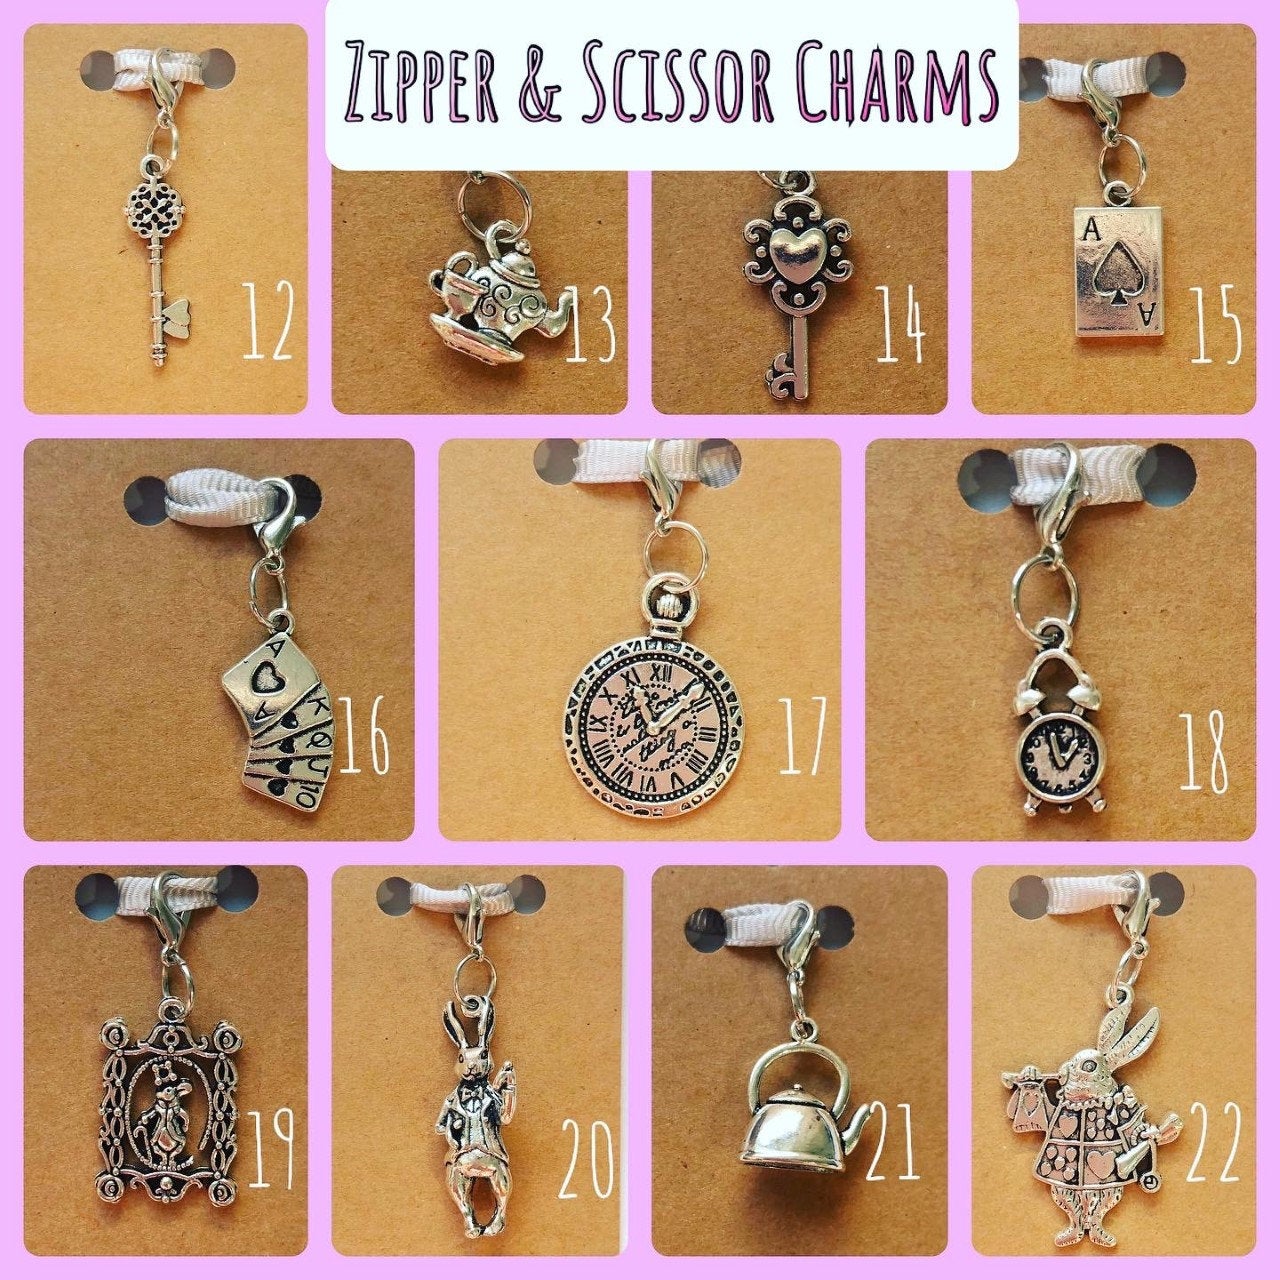 Limited Edition Alice in Wonderland Zipper or Scissor Charms